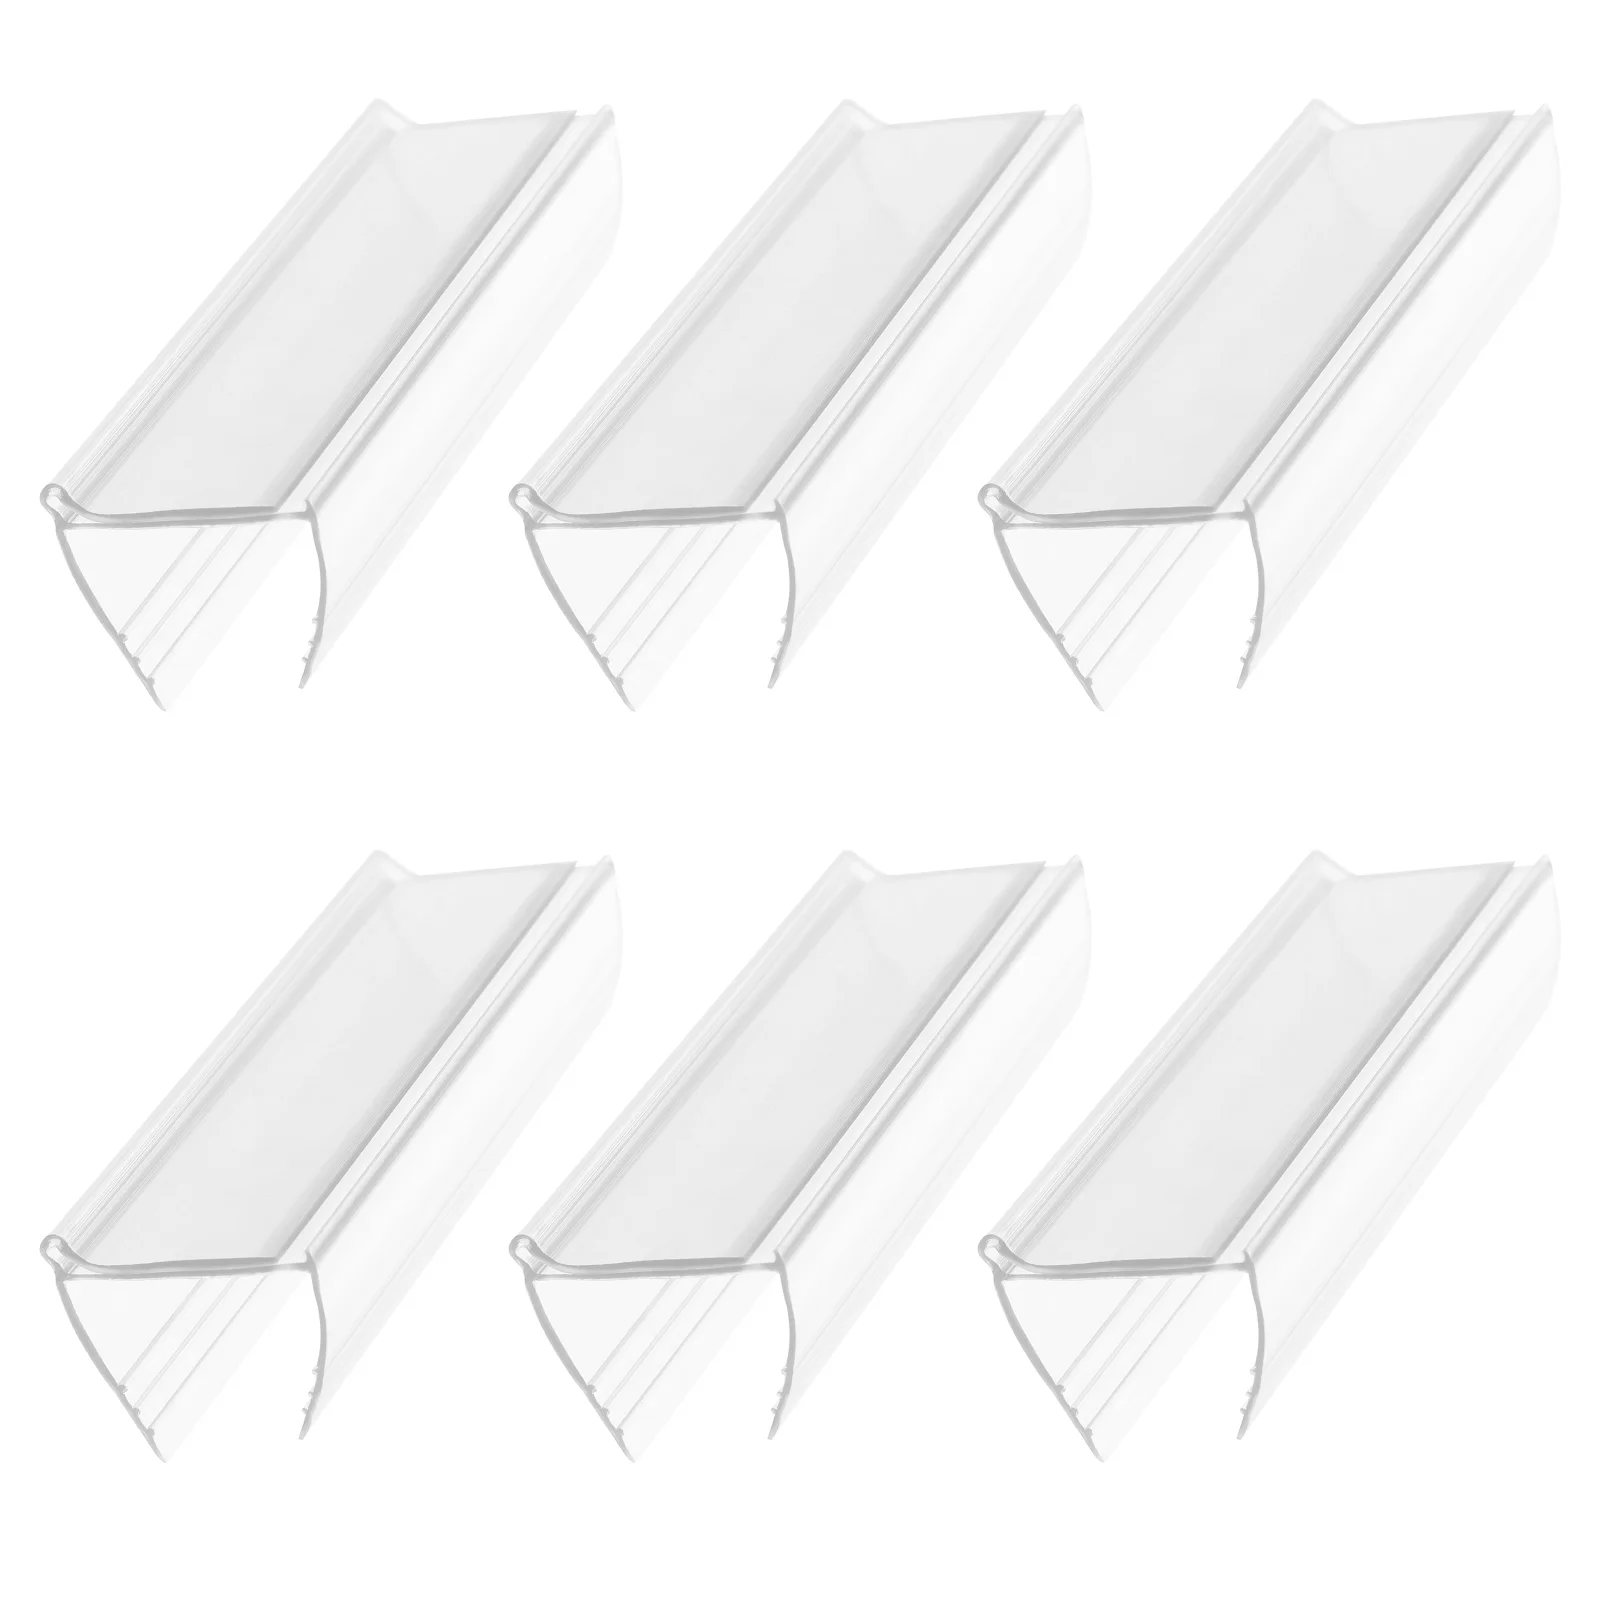 

6 Pcs Label Slot Stable Sign Holder Transparent Show Rack Card Price Tag Merchandise Display Shelf Acrylic Holders Clear Stand